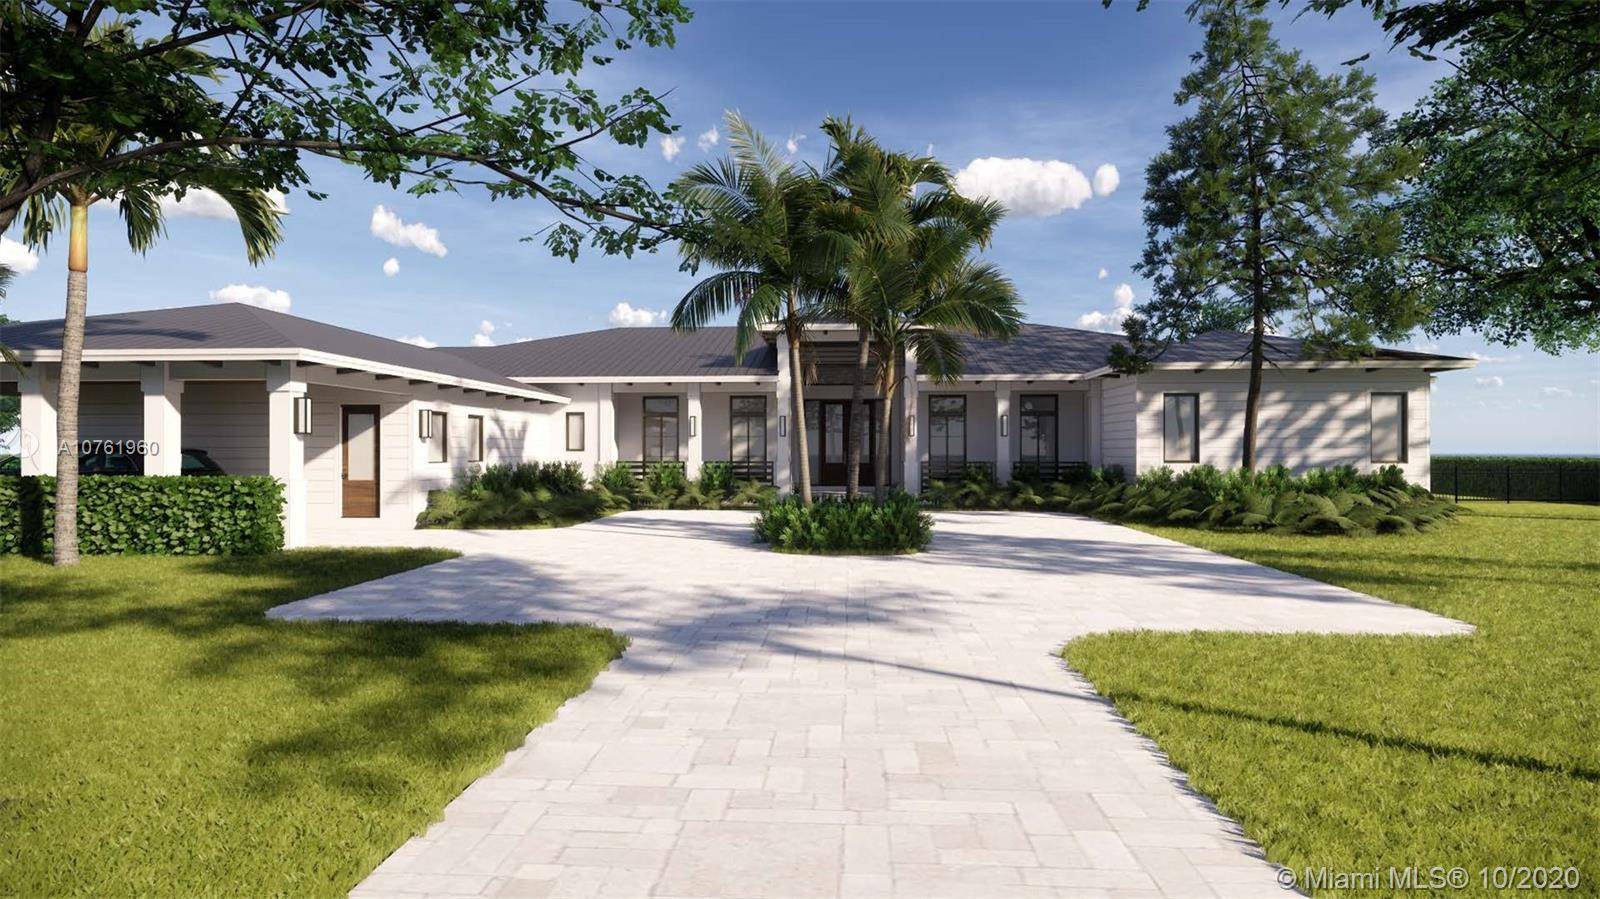 This custom designed new construction home showcases tropical modern architecture while delivering timeless style and legendary Hollub quality and attention to detail.